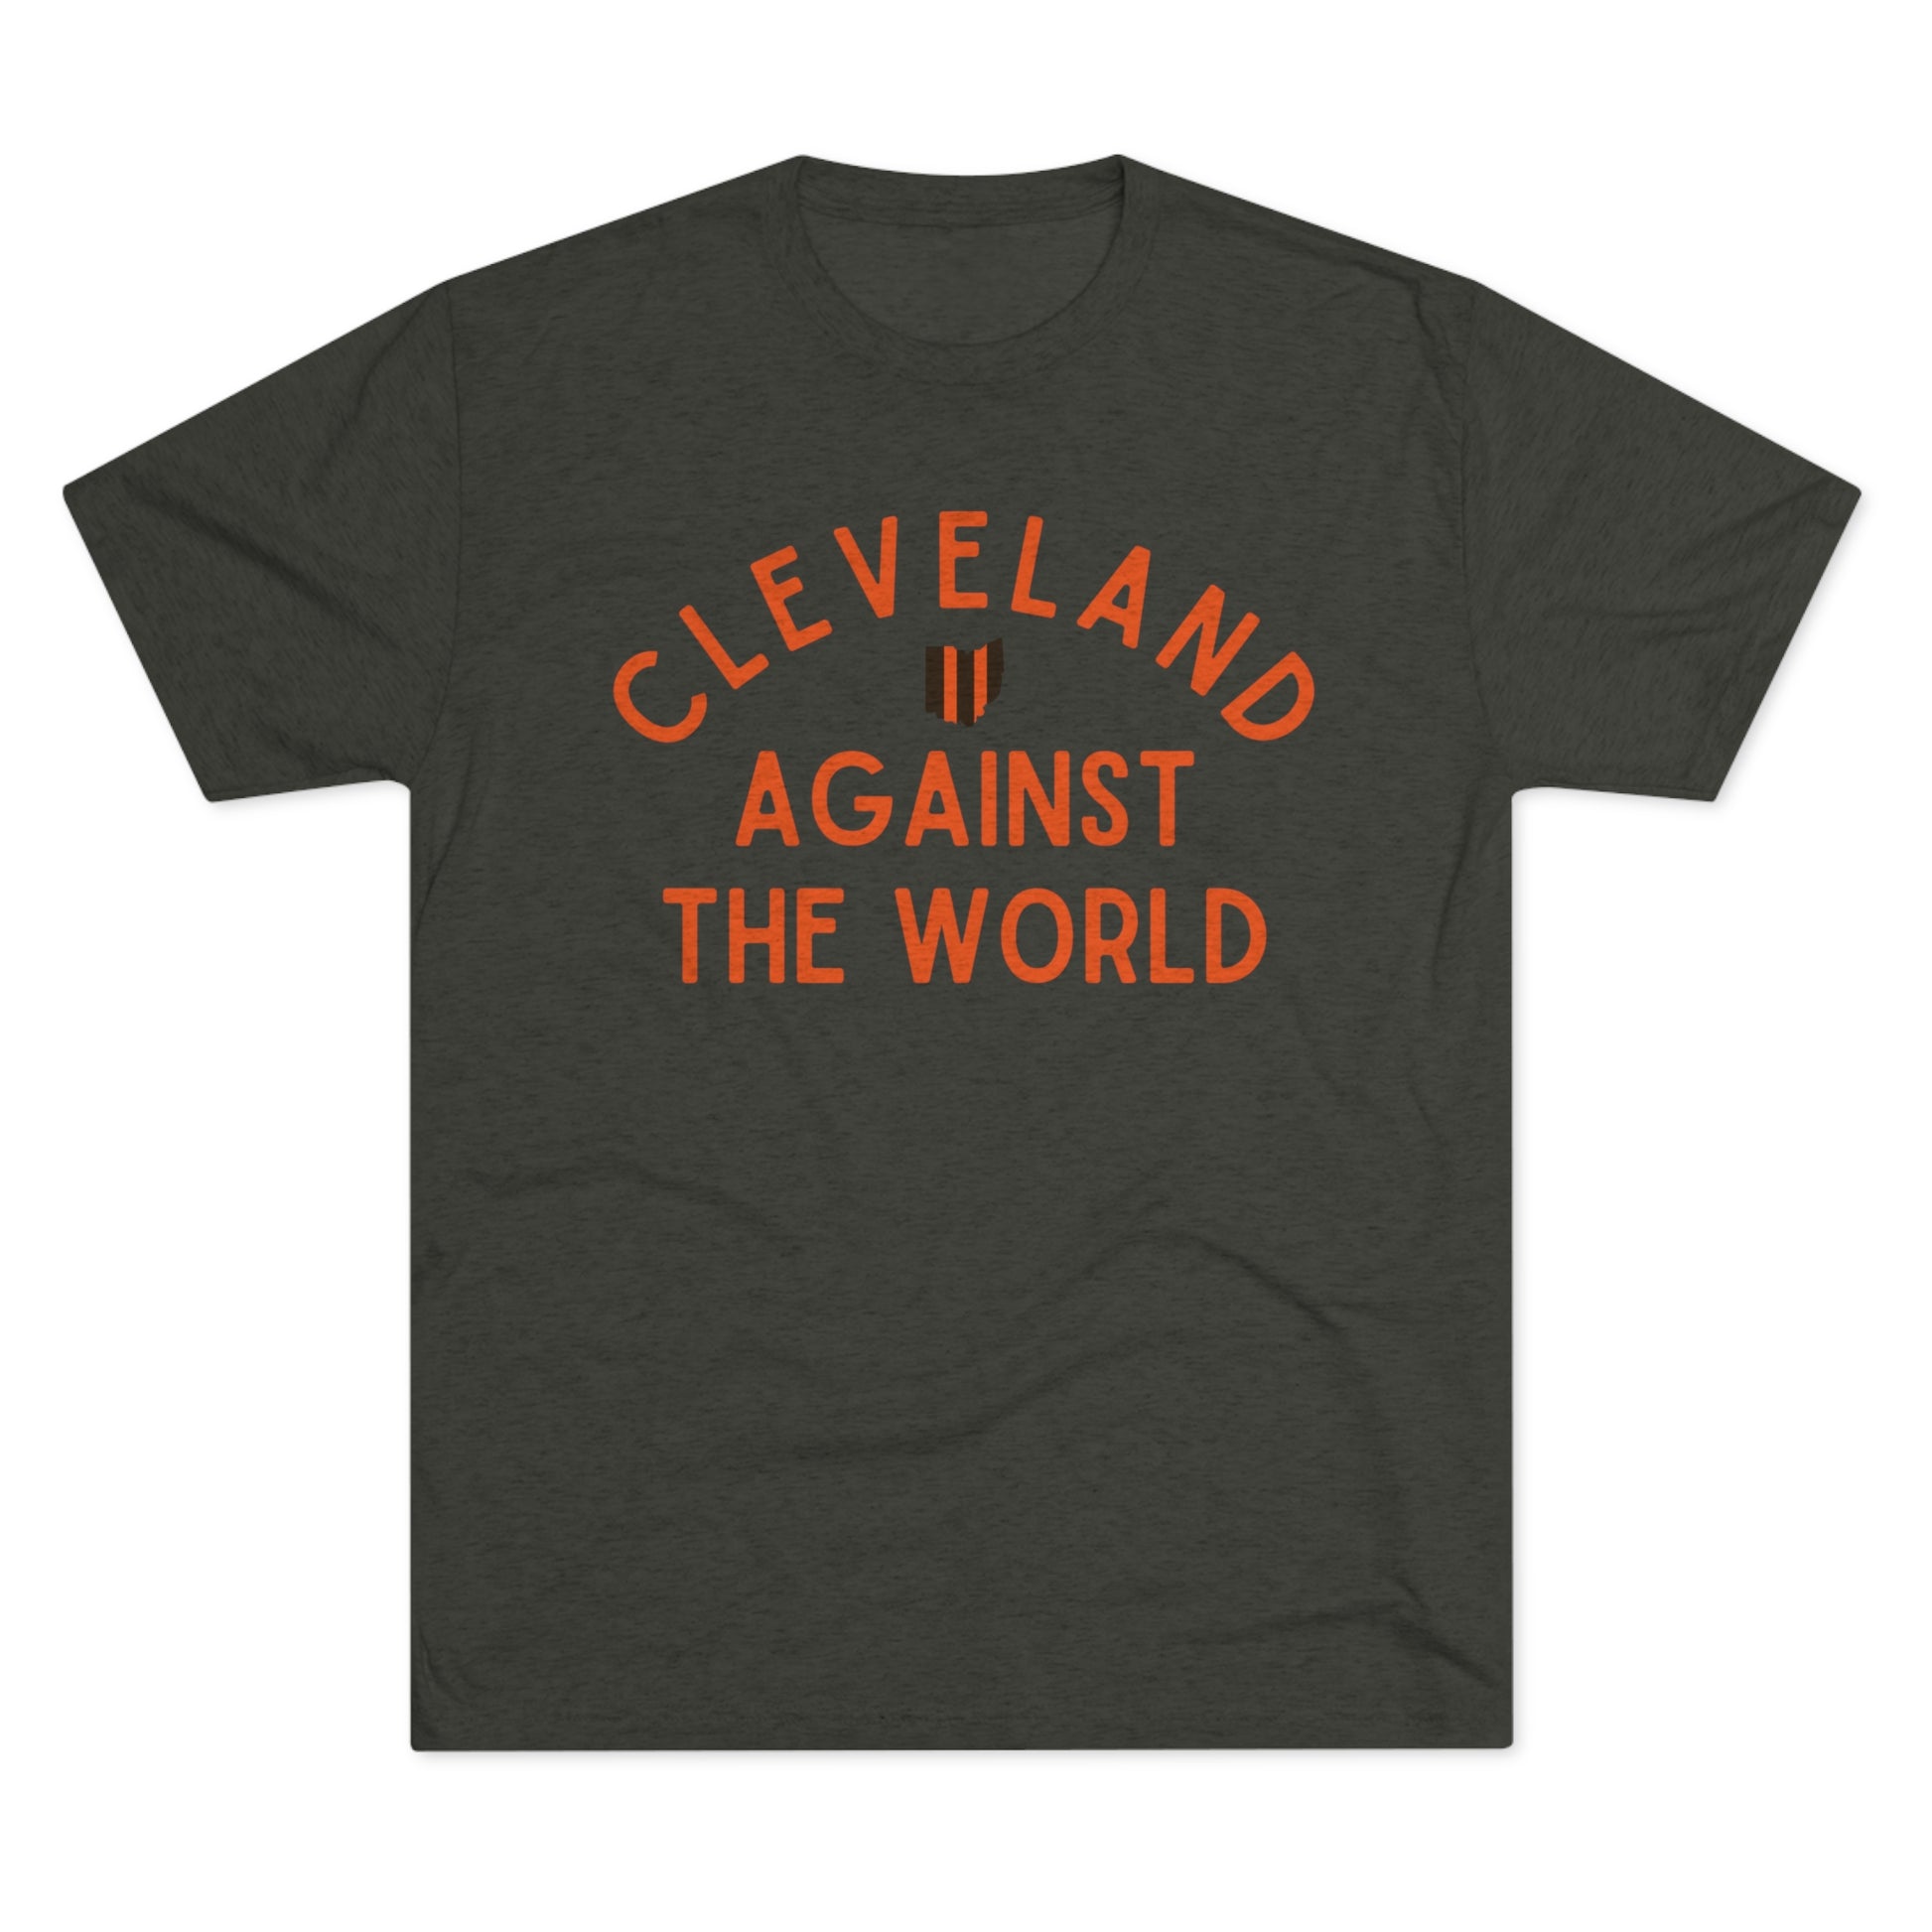 Cleveland Against the World Tshirt - Home Field Fan